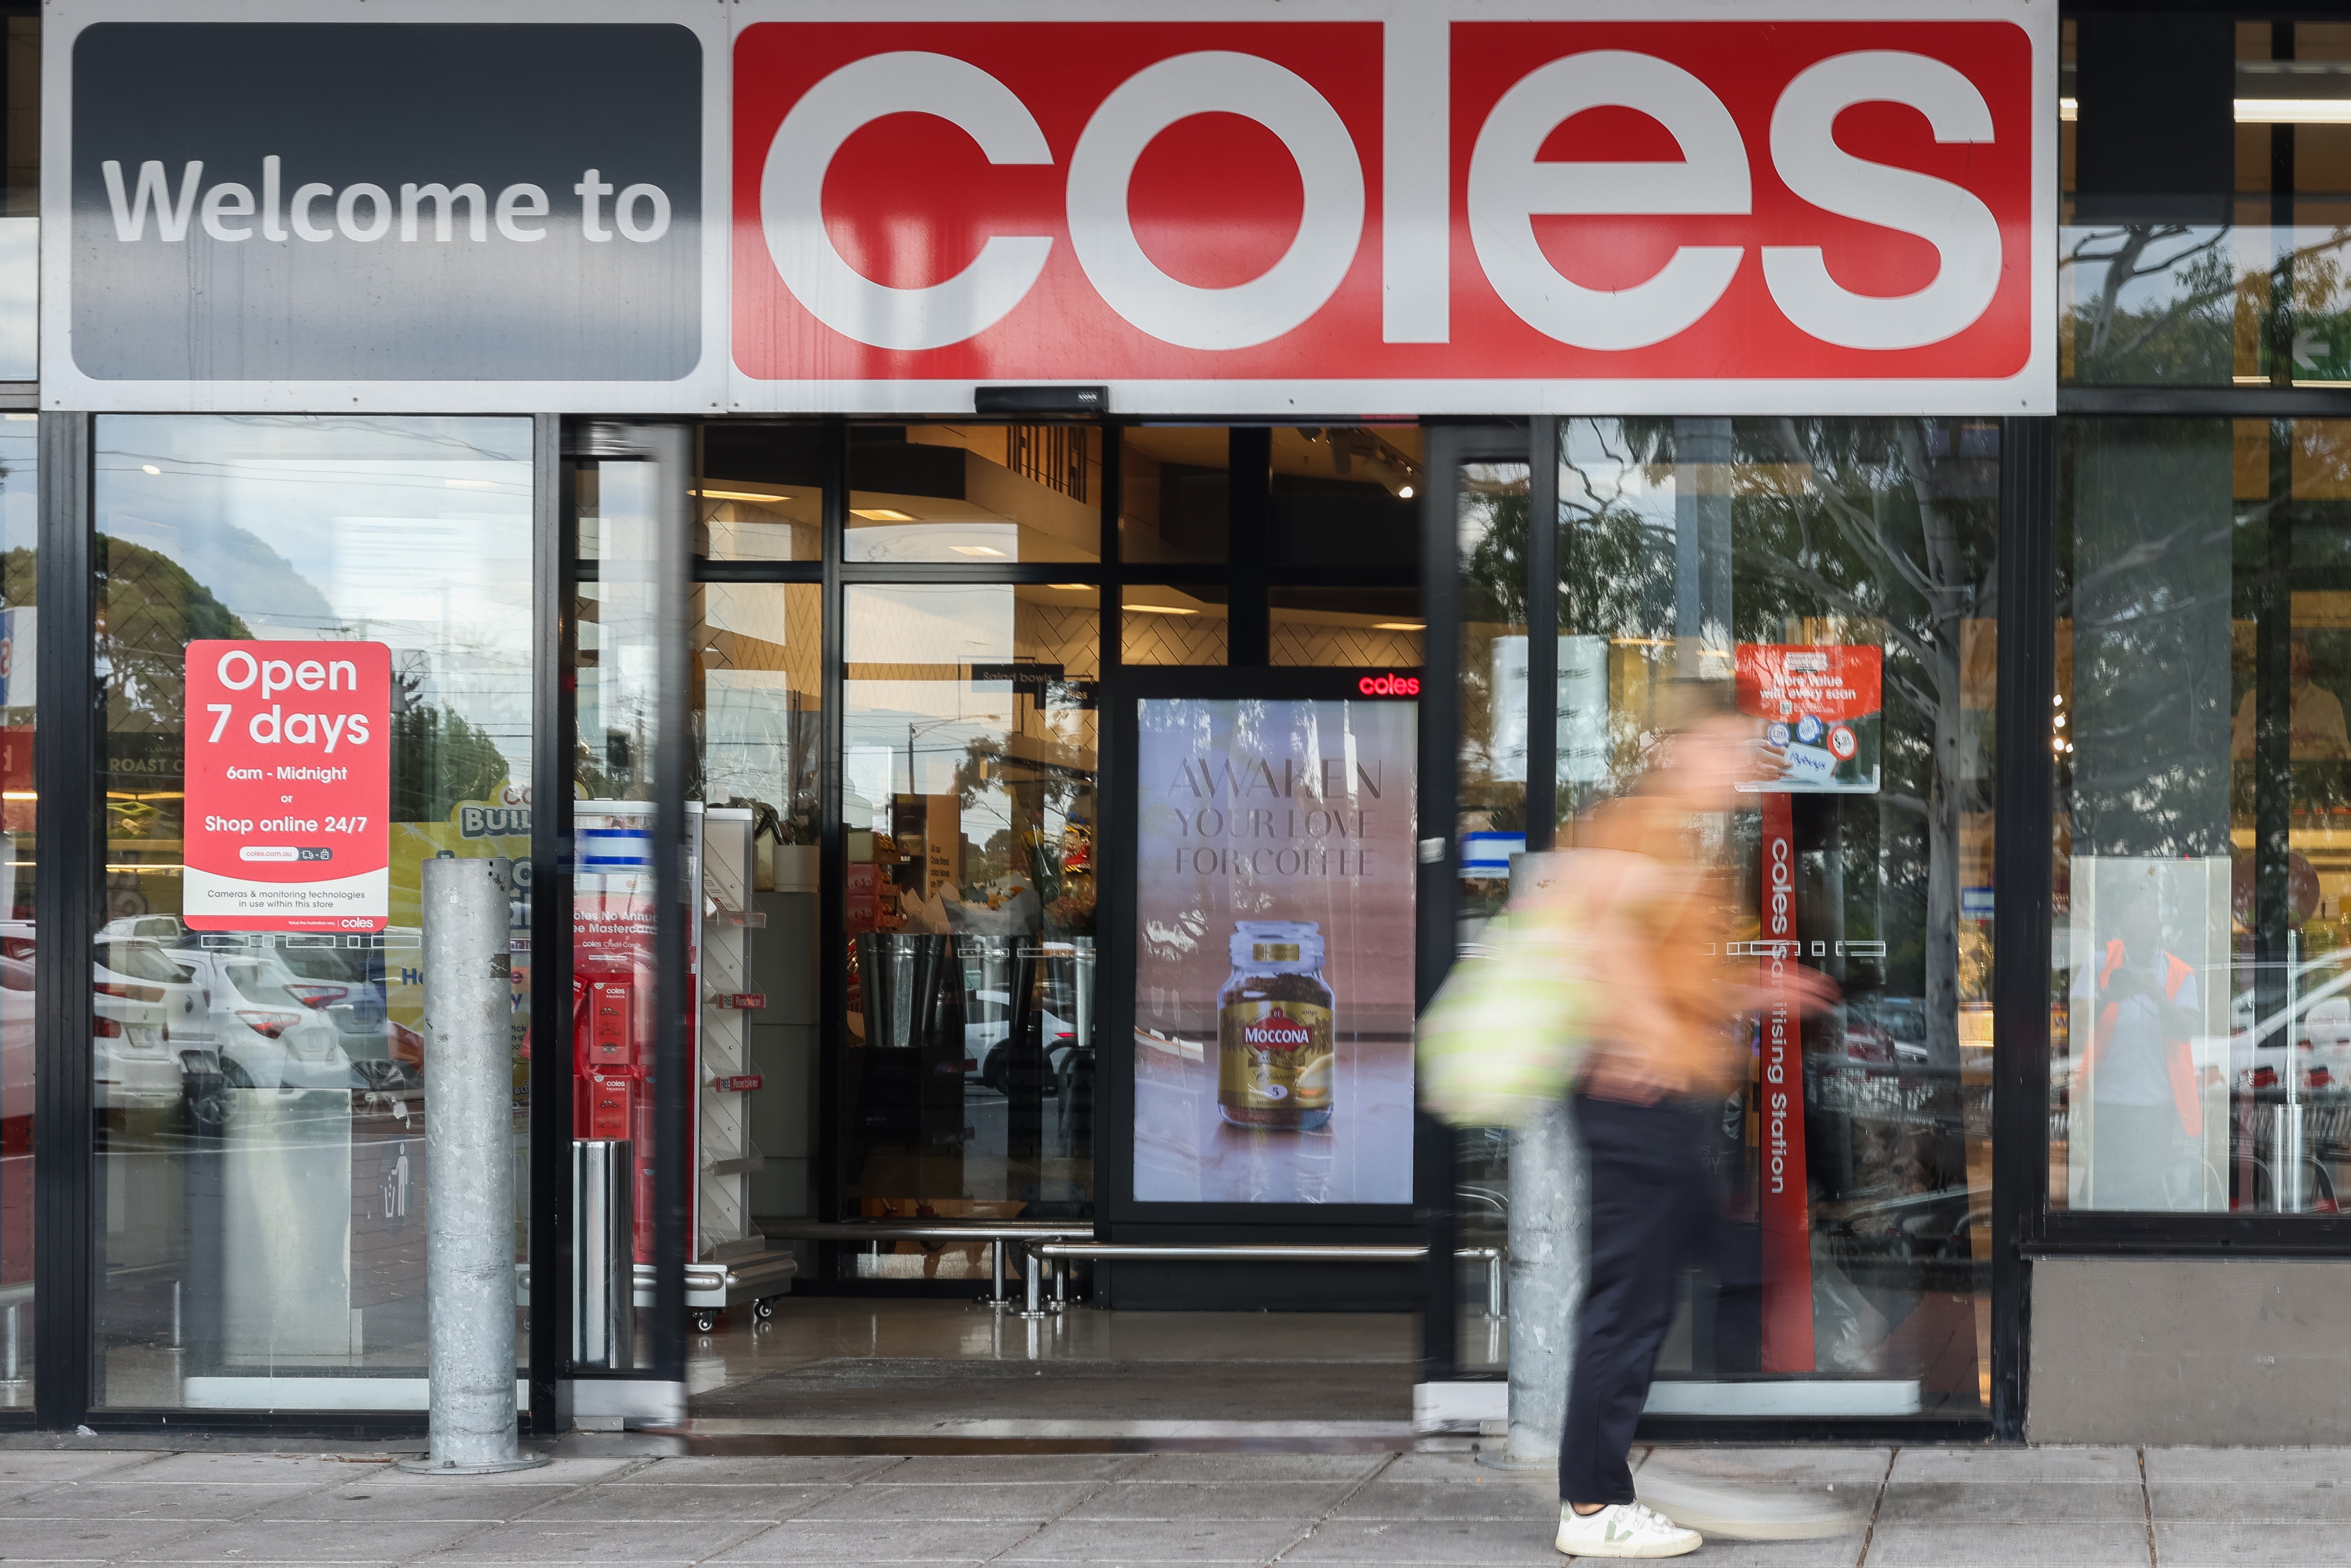 Coles has introduced a nationwide purchase limit on eggs as shortages linked to bird flu disrupts the supermarket giant's supply.